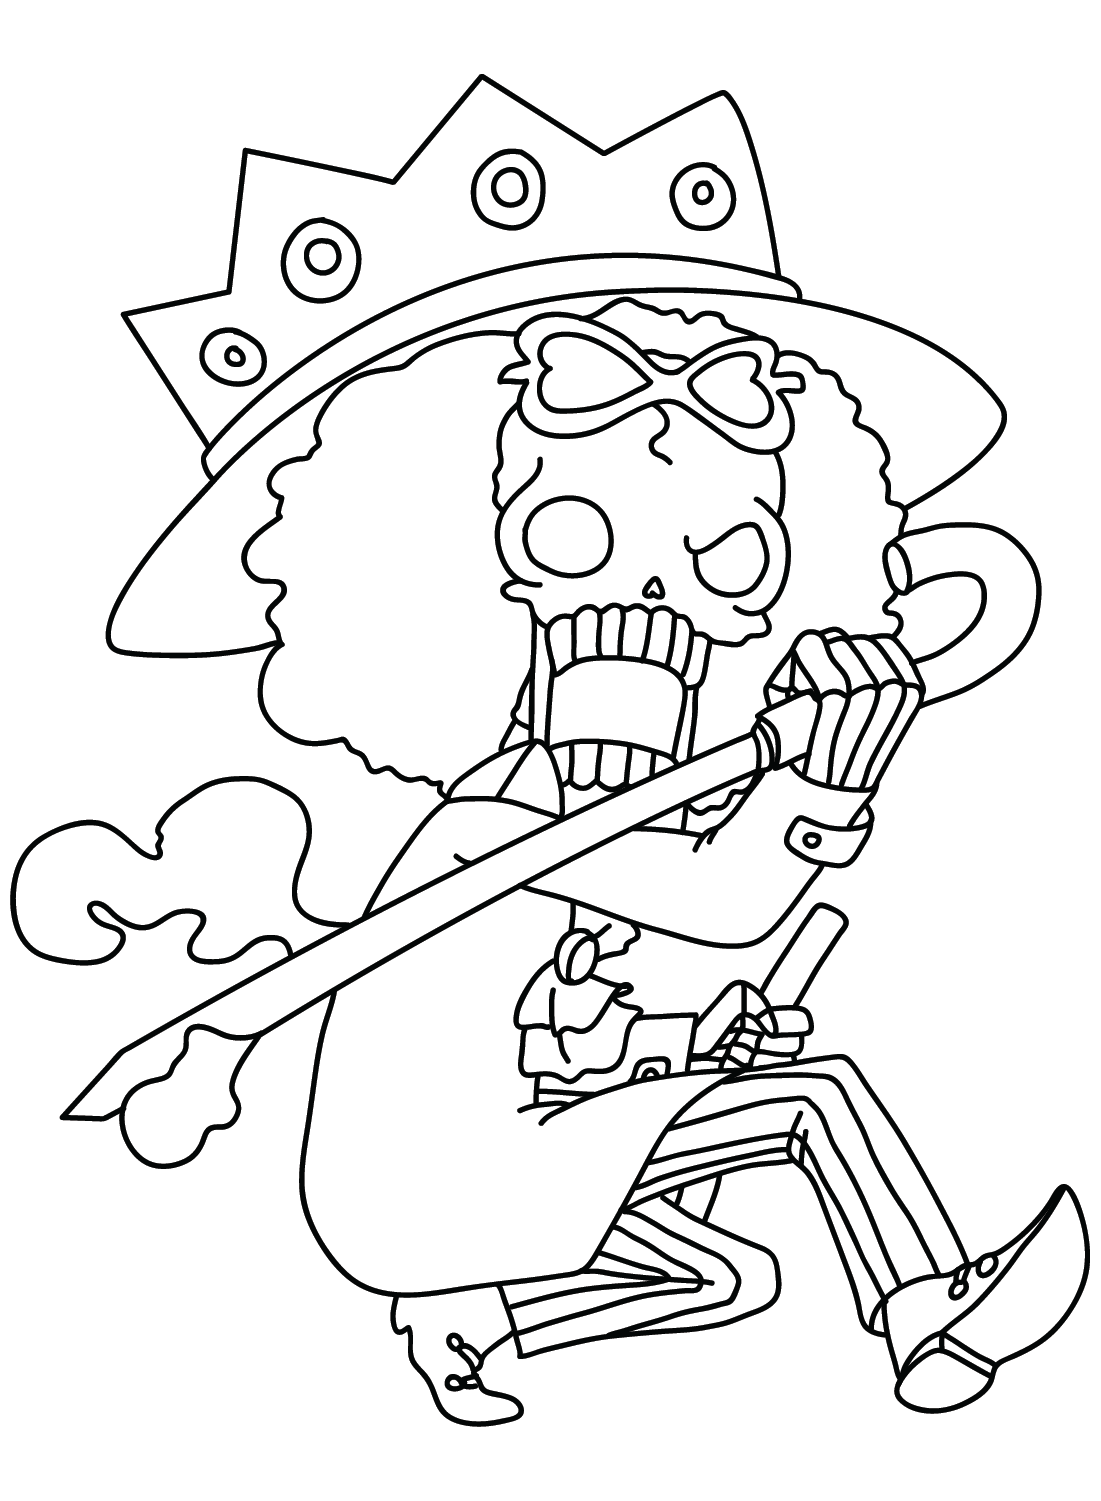 Brook Coloring Page PDF - Free Printable Coloring Pages